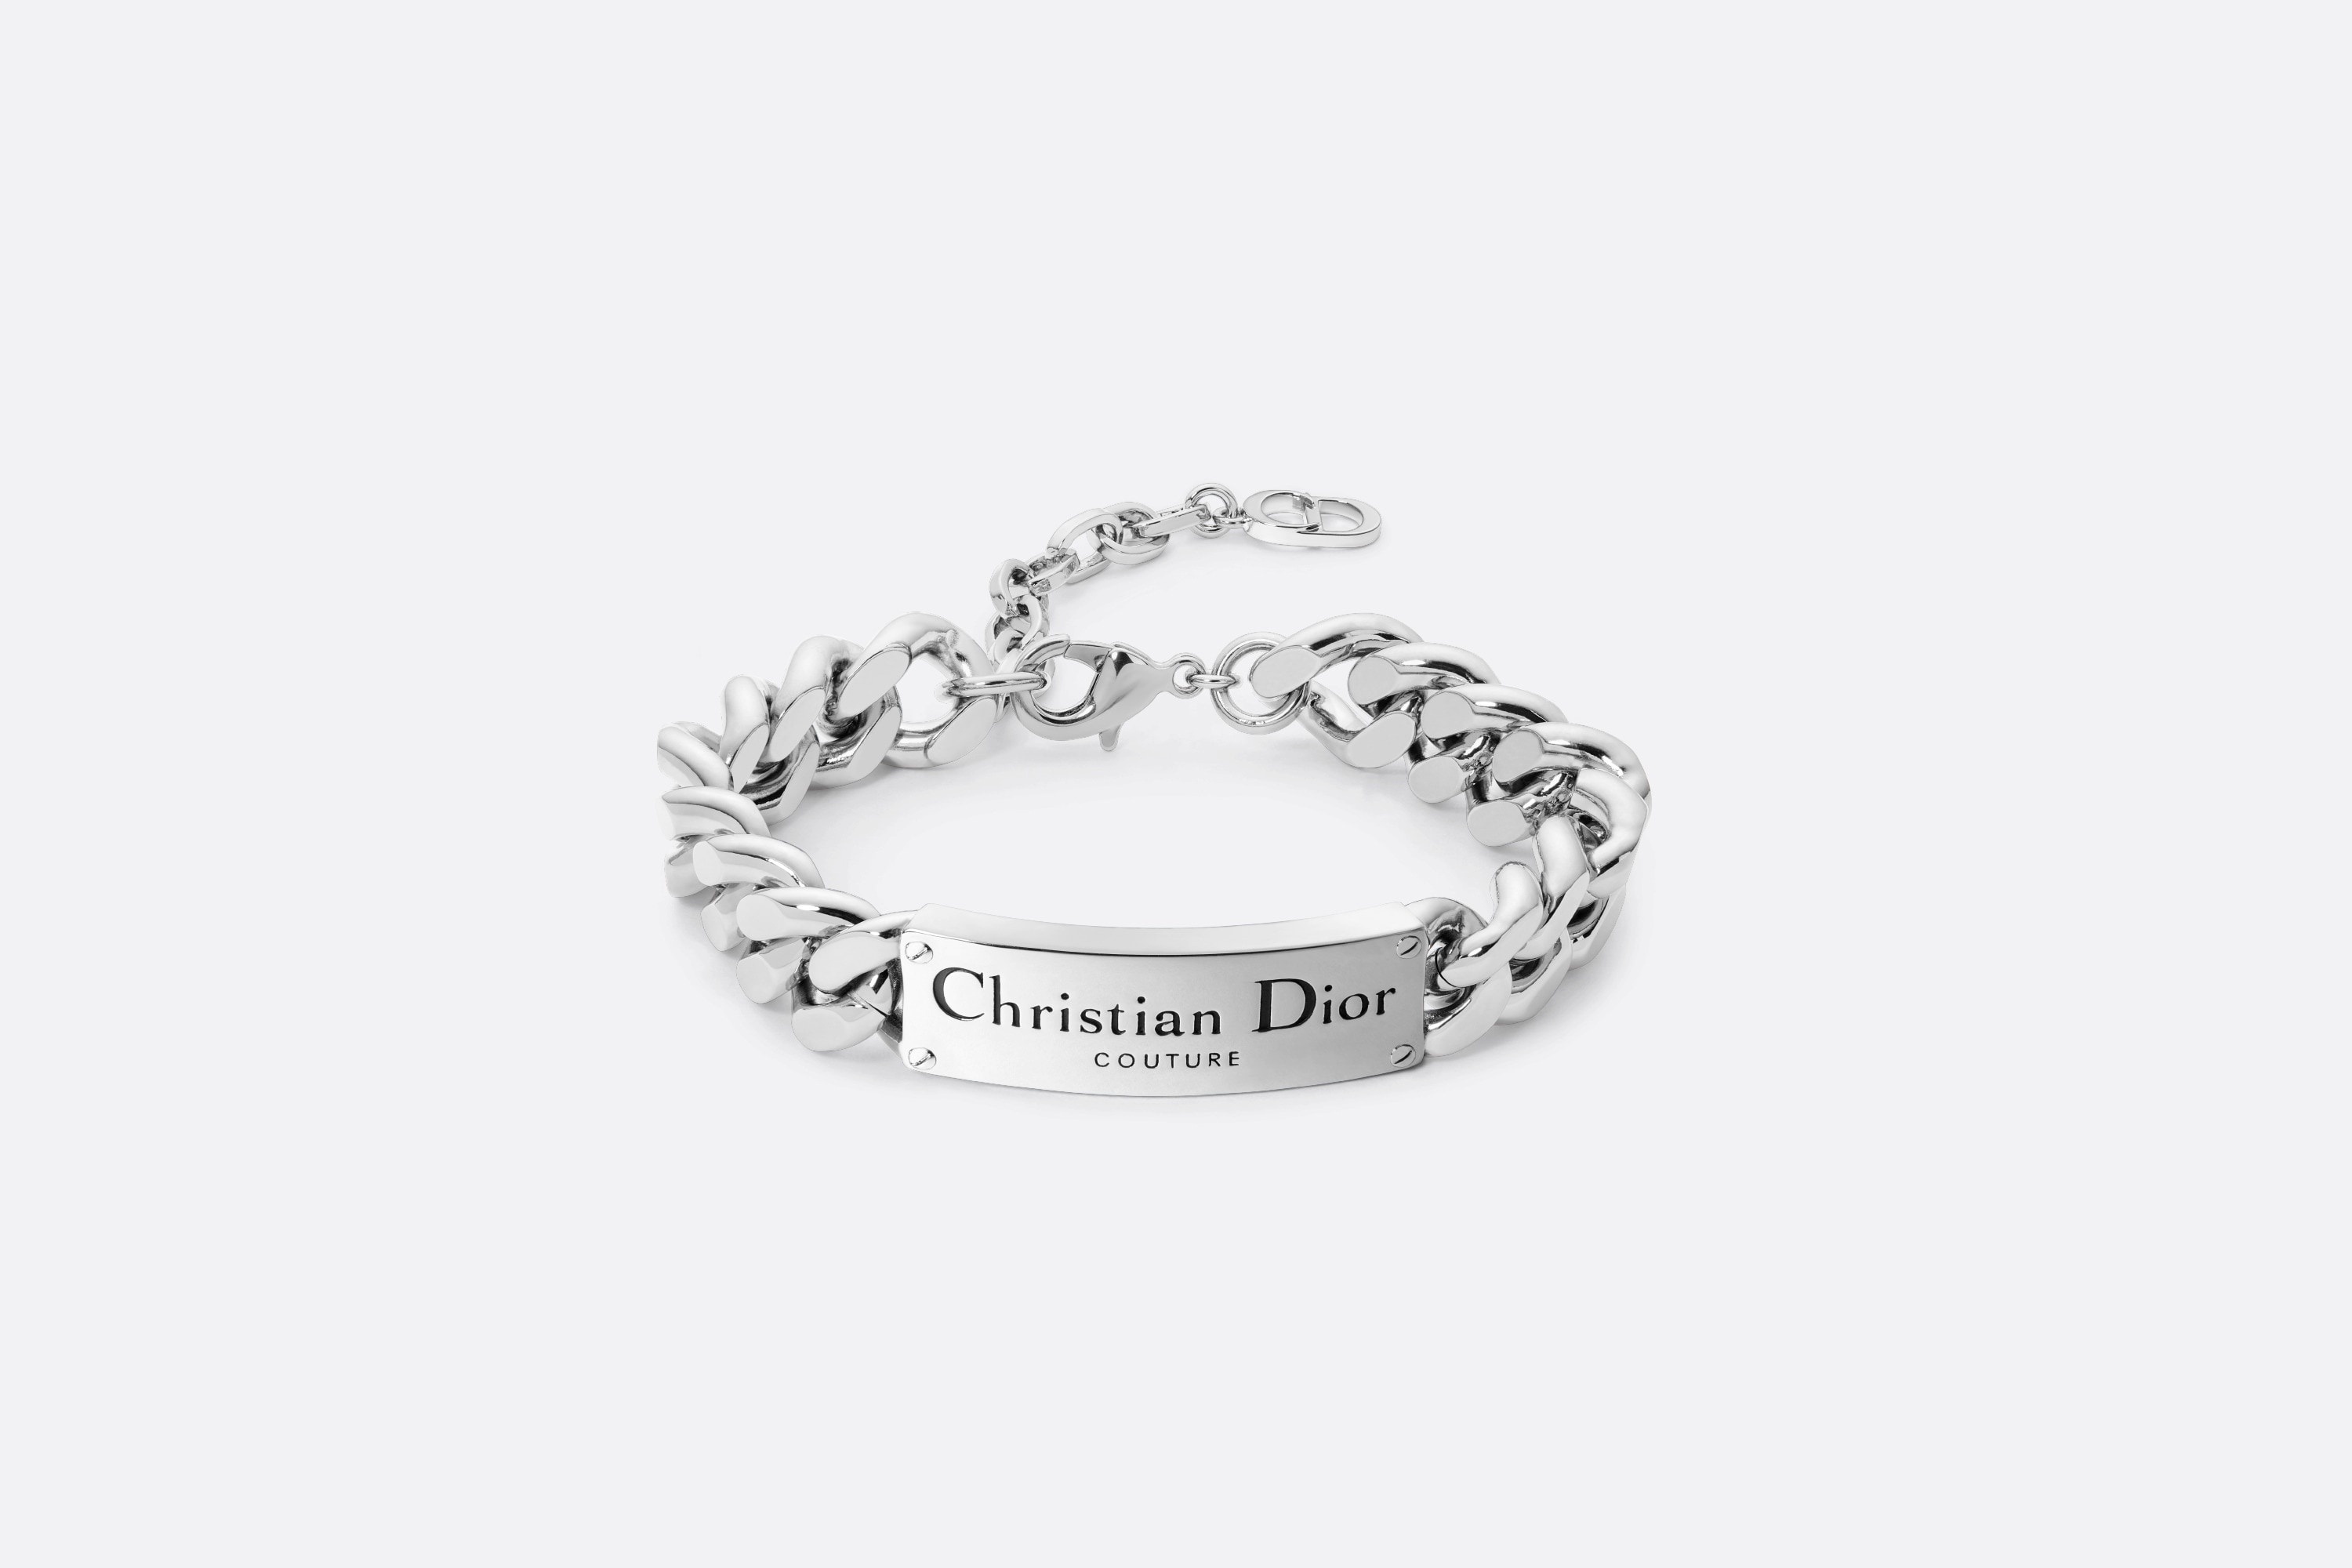 Christian Dior Couture Chain Link Bracelet - 1